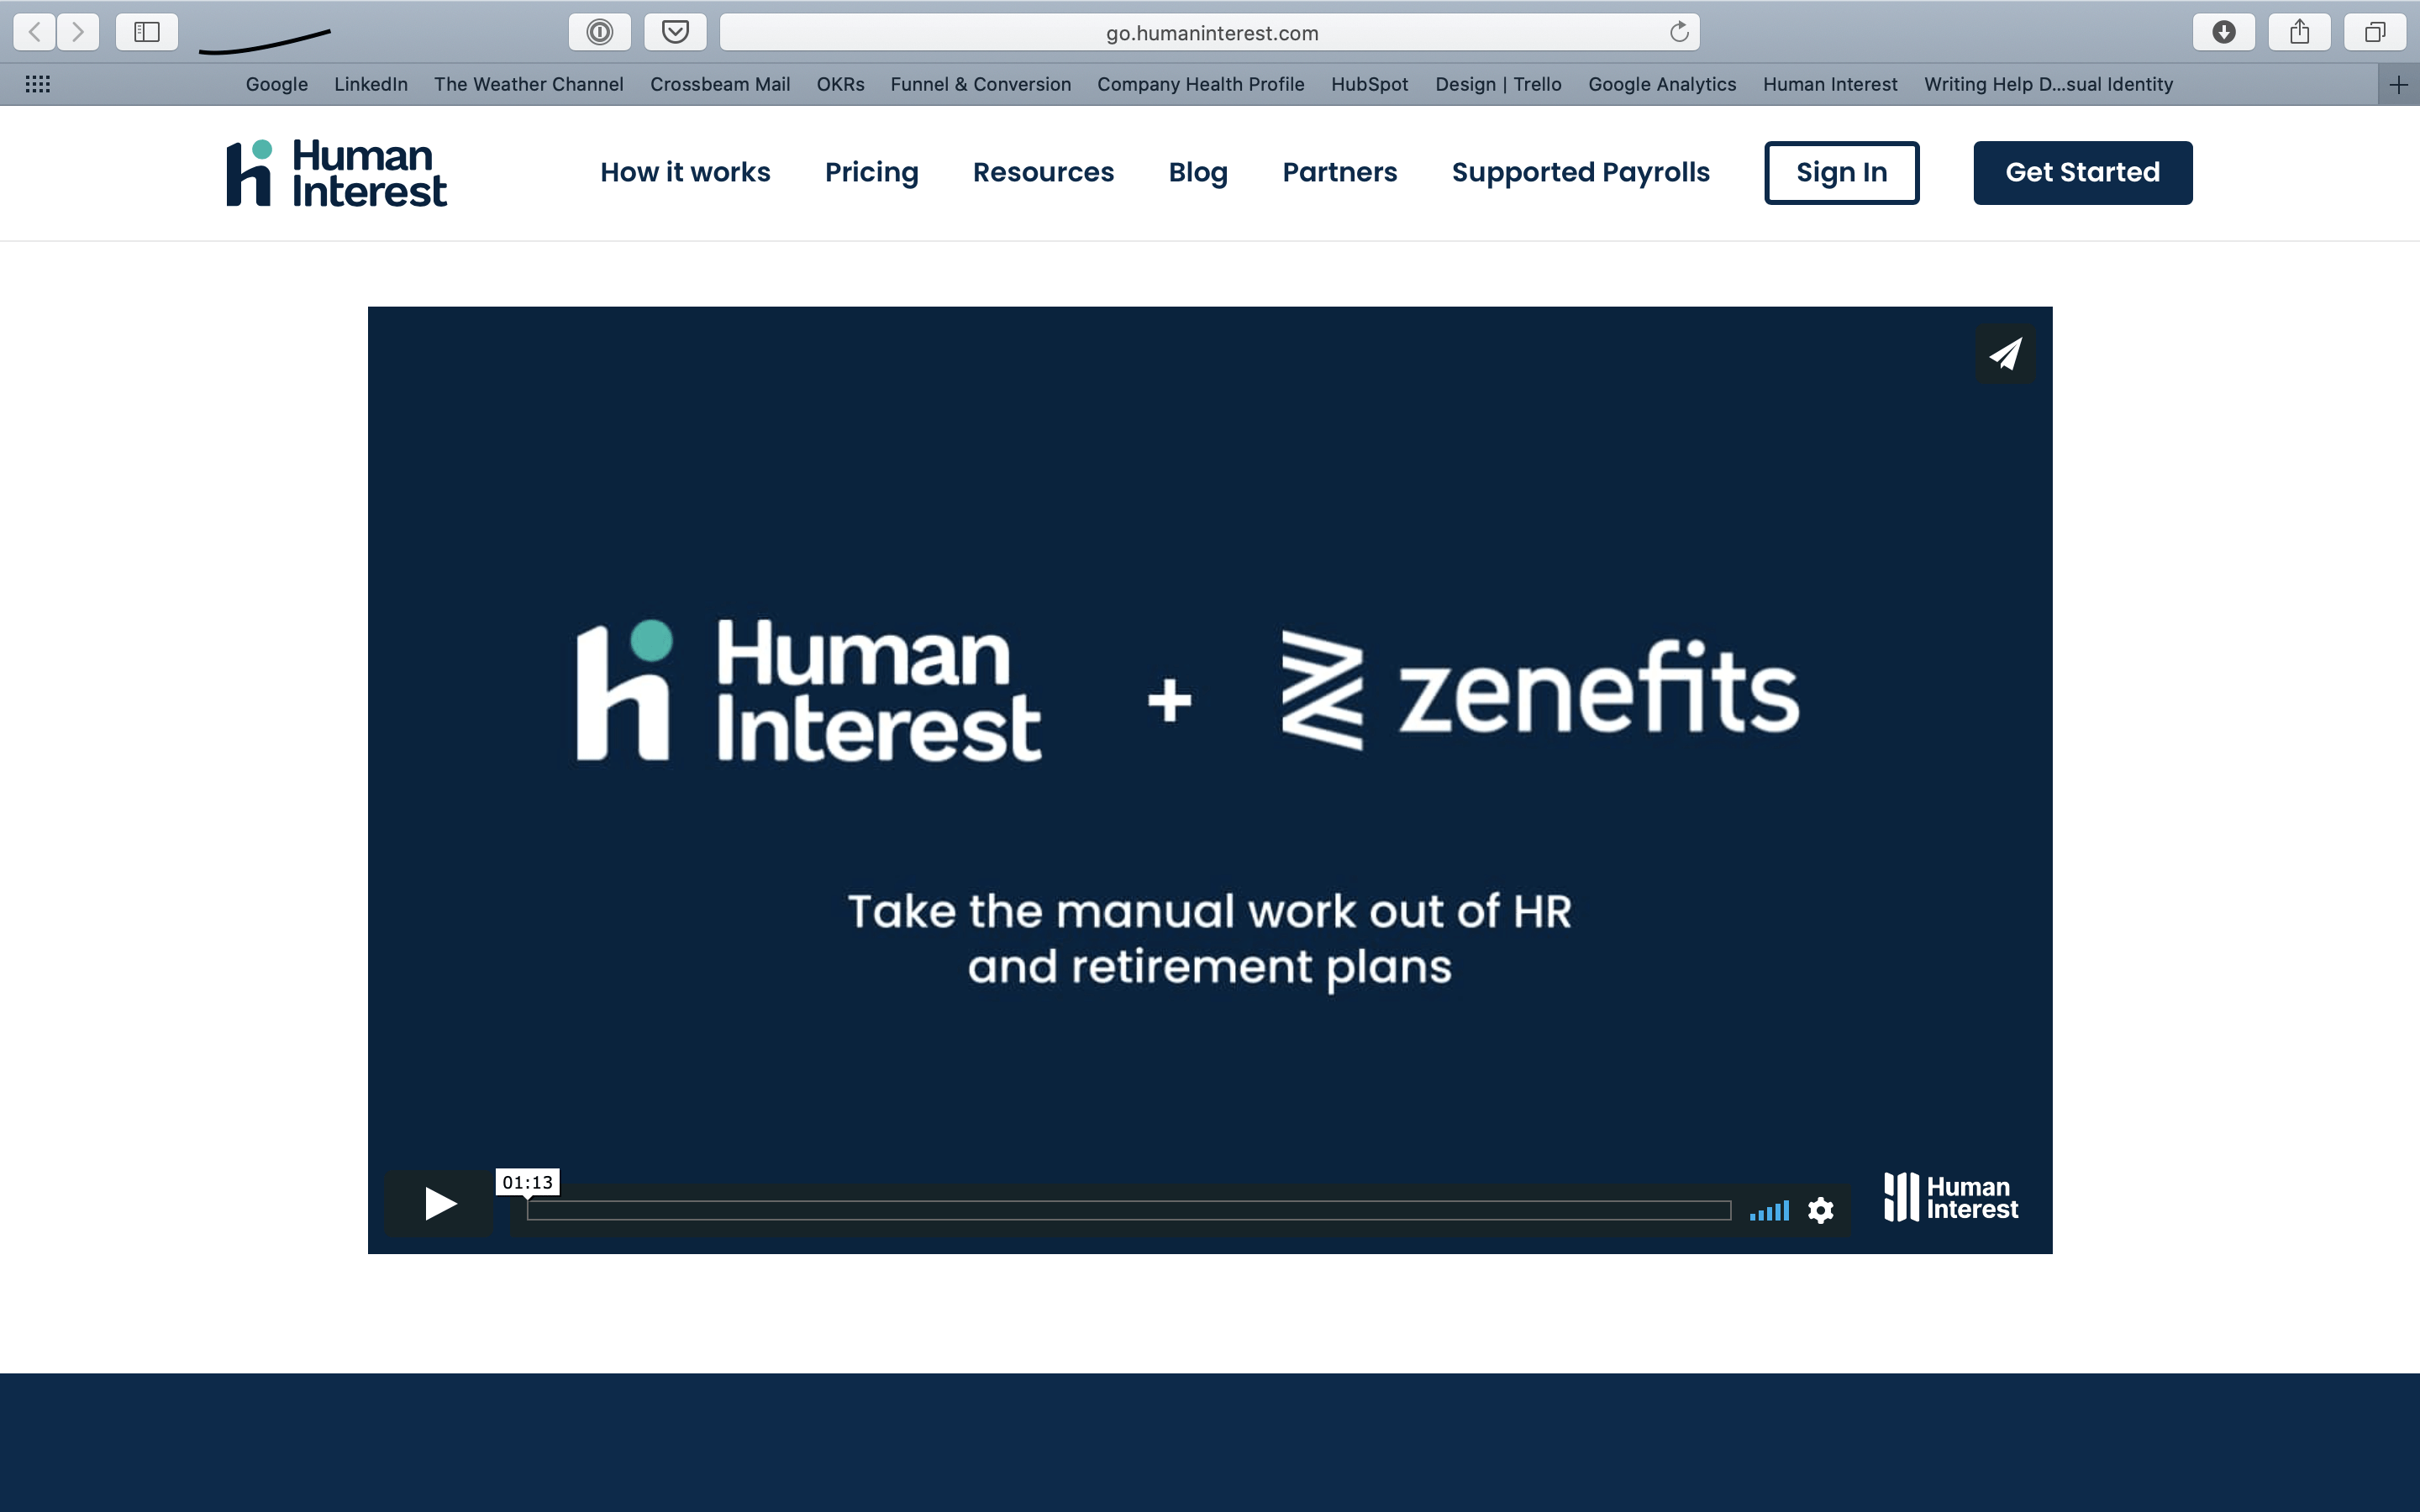 Zenefits and Human Interest partner page